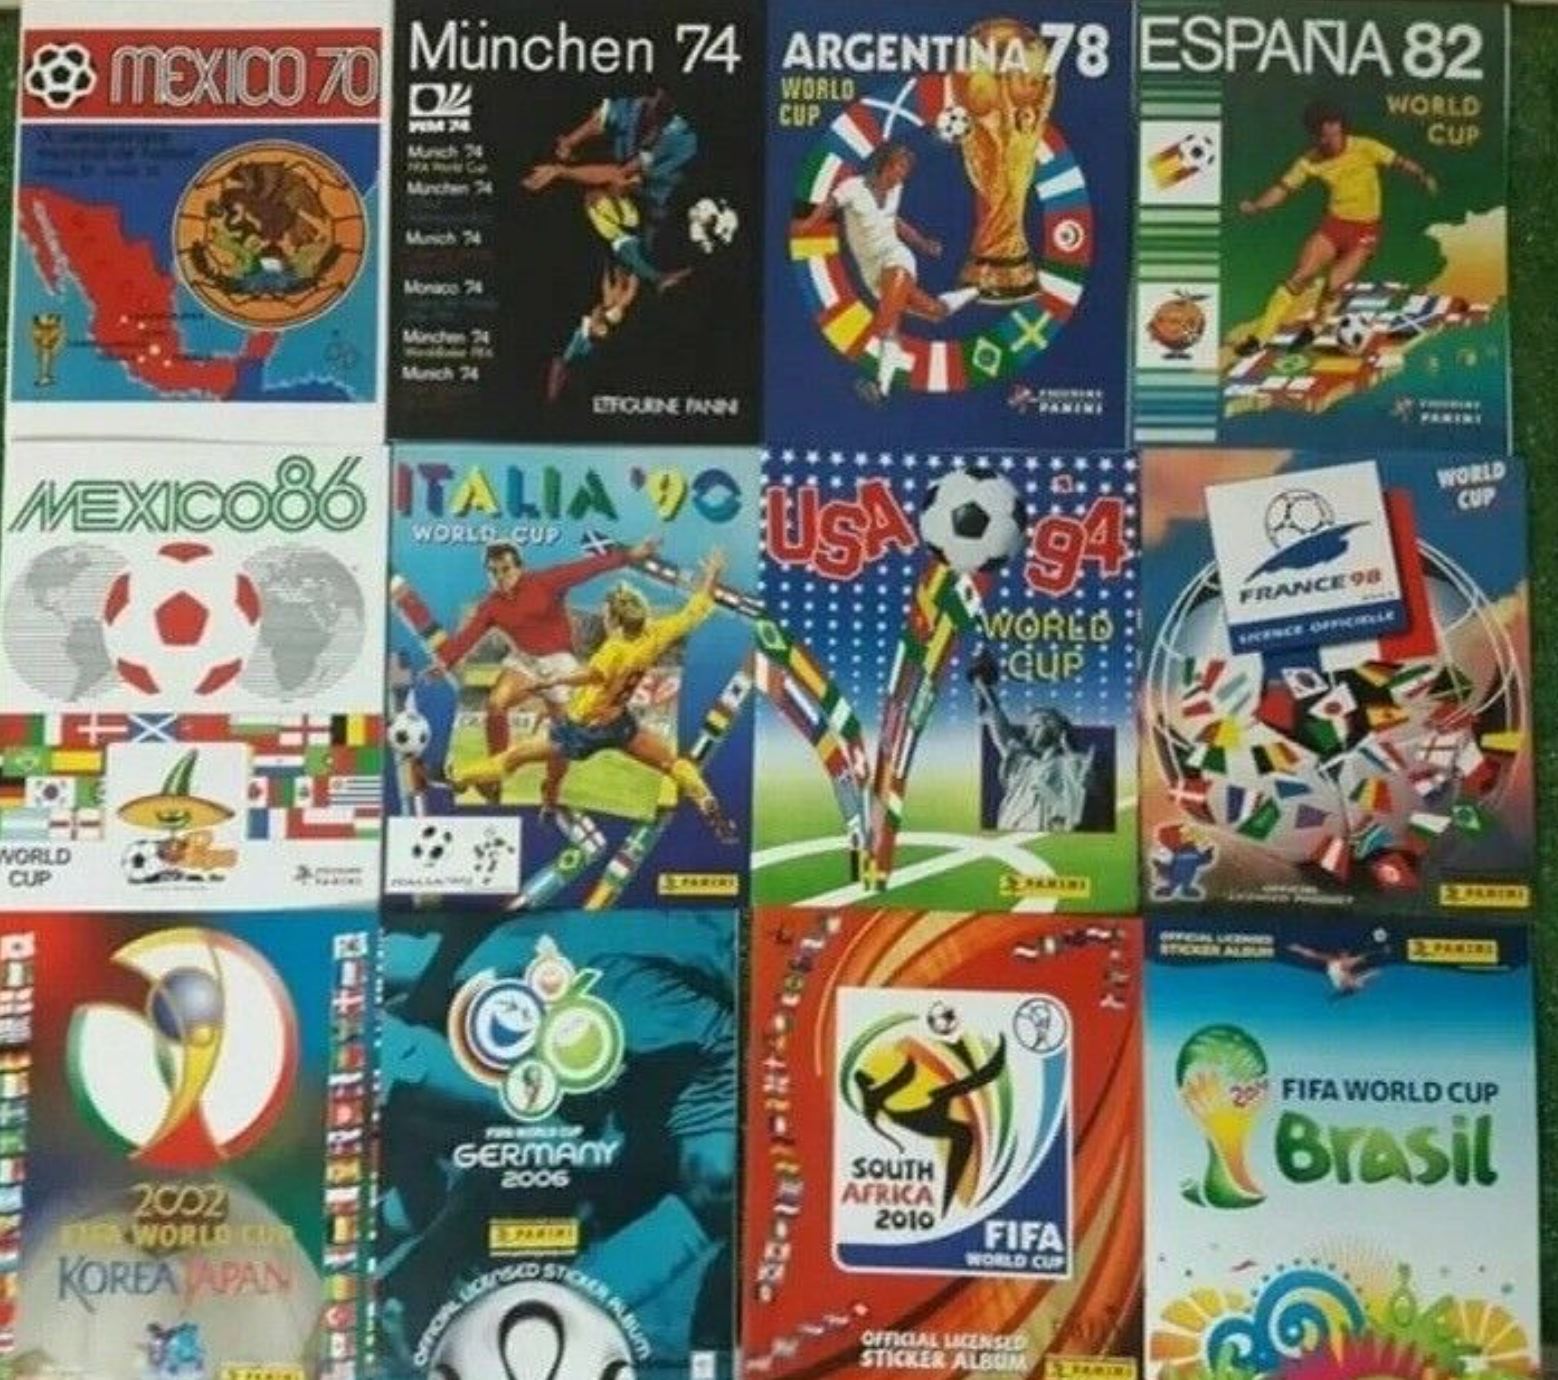 COMPLETE COLLECTION SET 11 PANINI ALBUMS ORIGINAL 2014 REPRINT EDITION BY PANINI